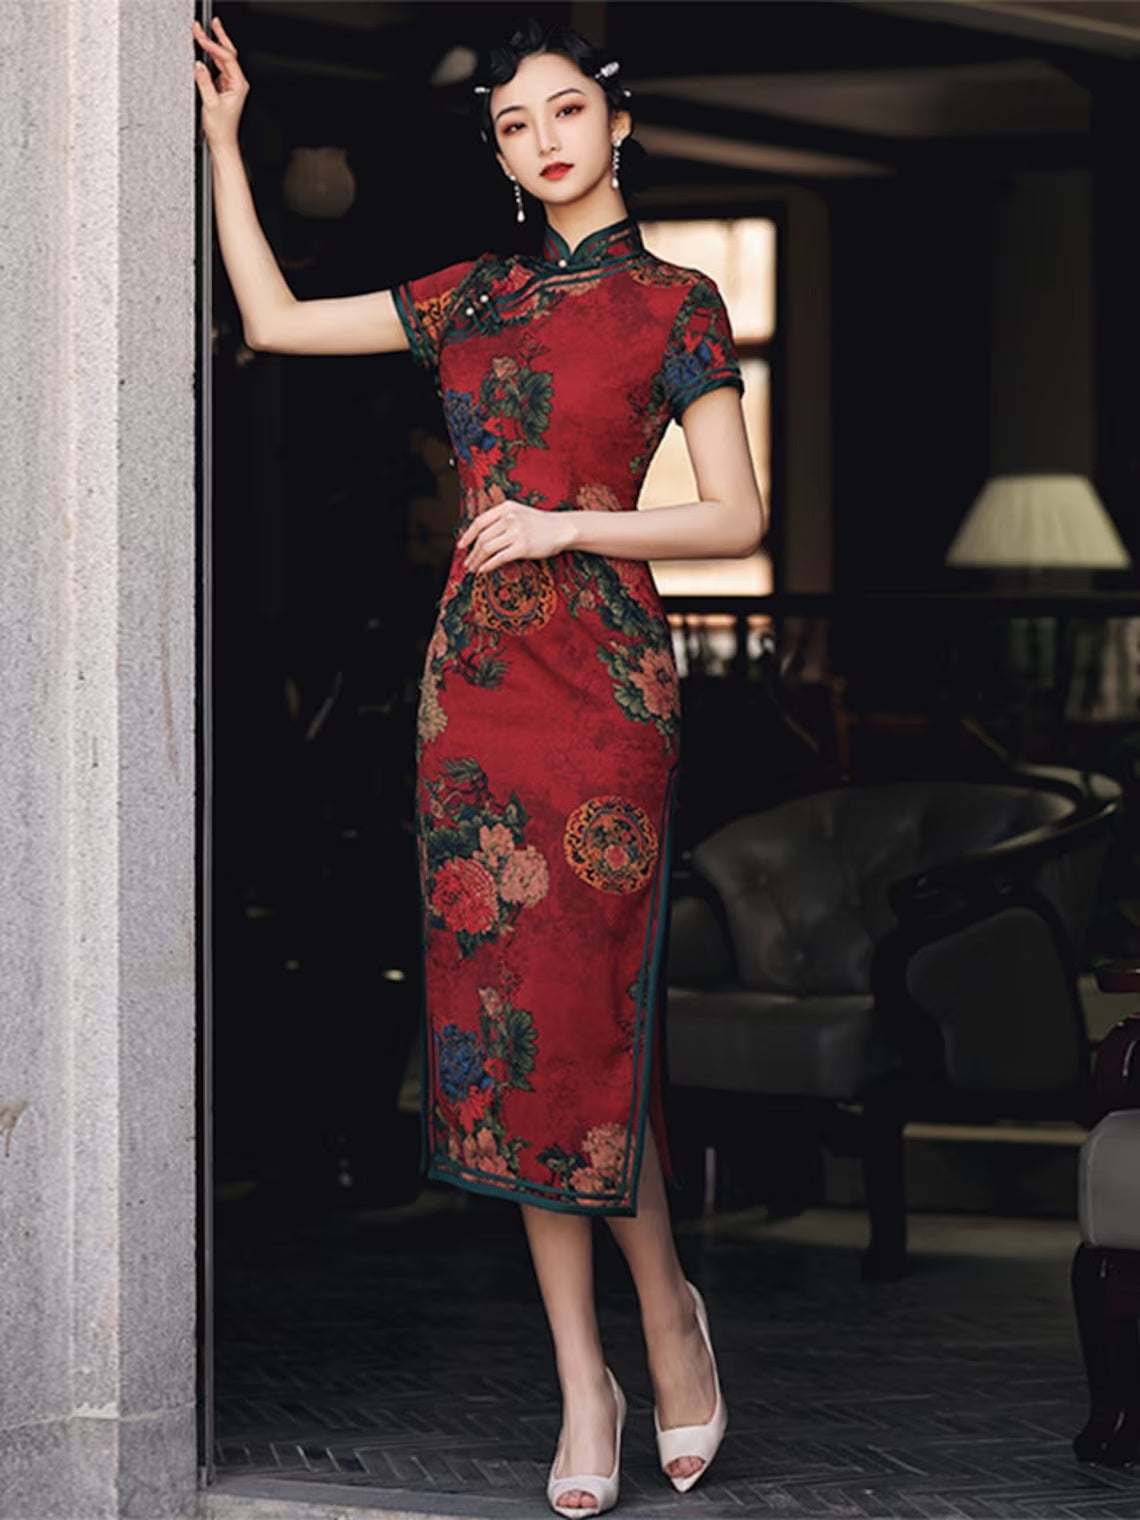 Model in red chinese floral qipao cheongsam dress standing